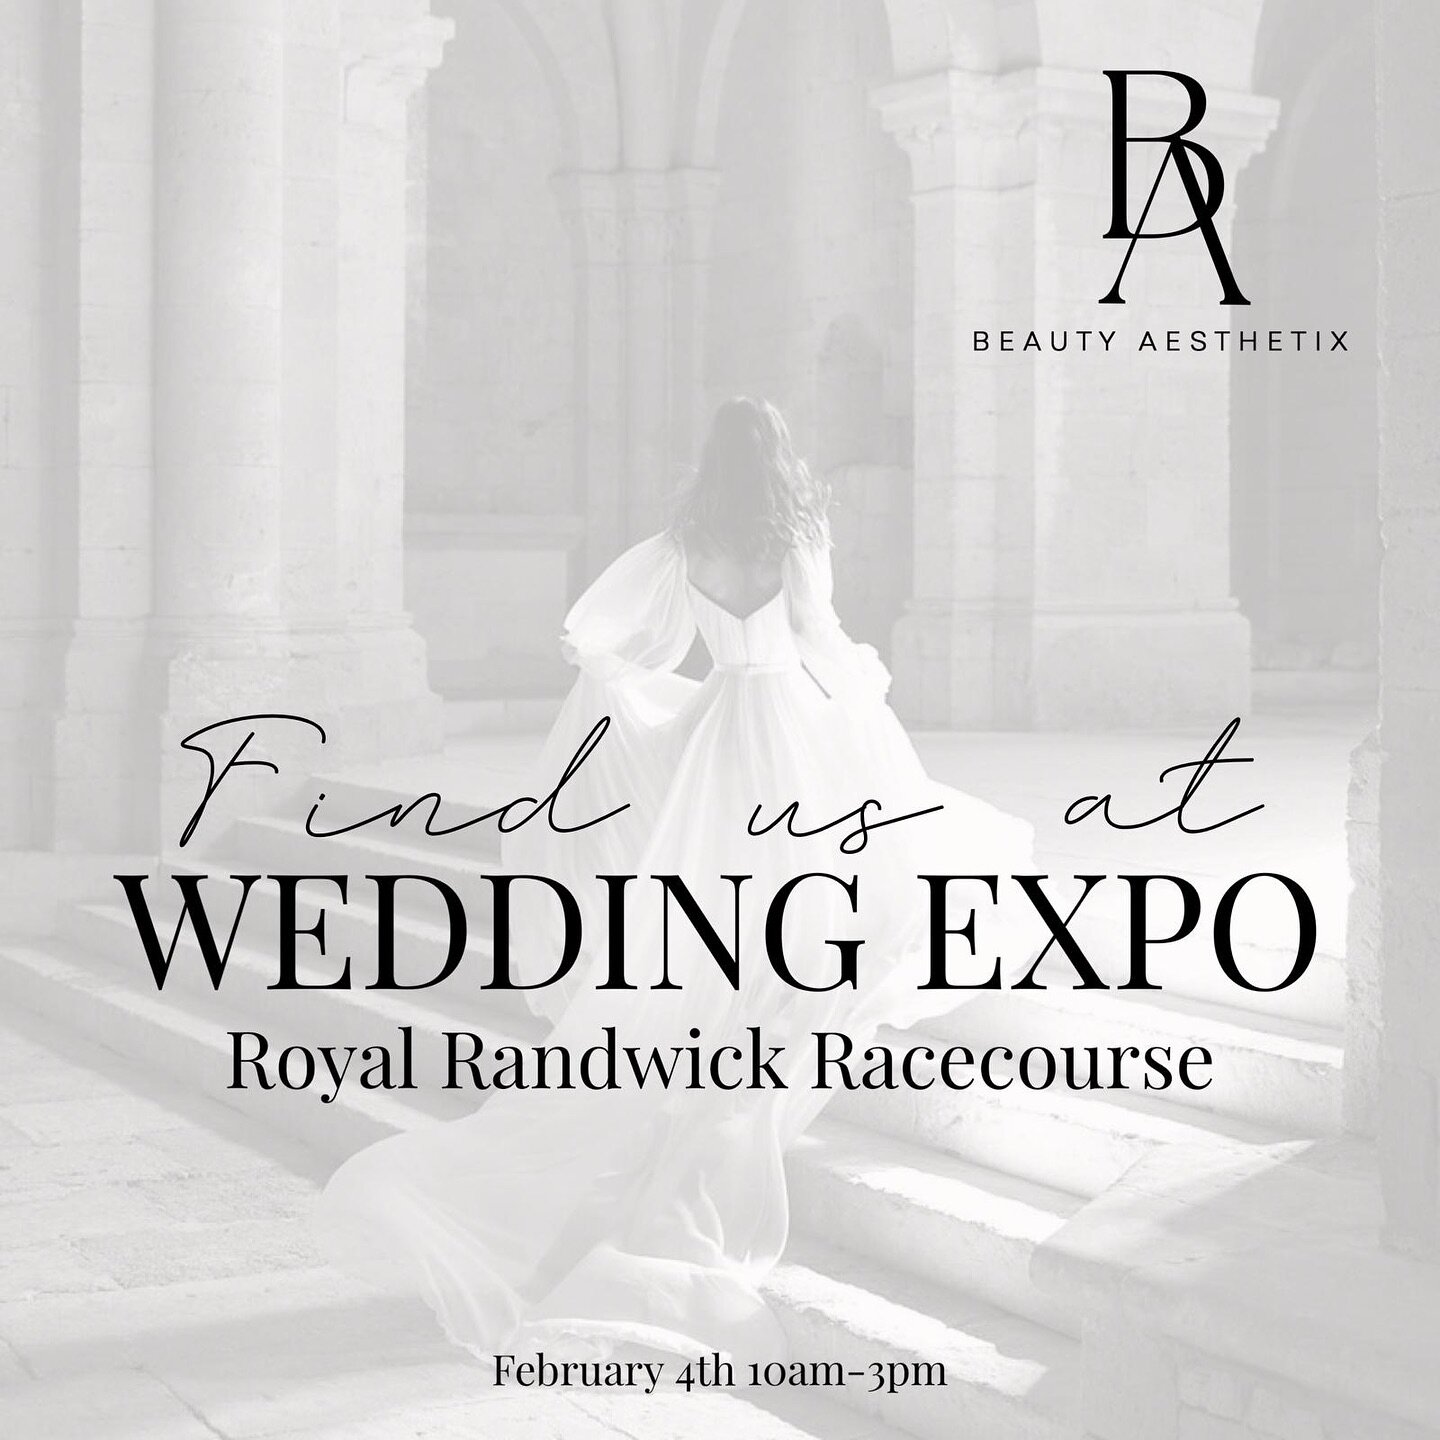 We&rsquo;re so excited to be attending Sydney&rsquo;s Annual Wedding Expo at Randwick Racecourse with @weddingexpos.australia 

Visit the team at booth 71 to enter our giveaway, watch a live demo on a bride, and get your hands on our bridal goodie ba